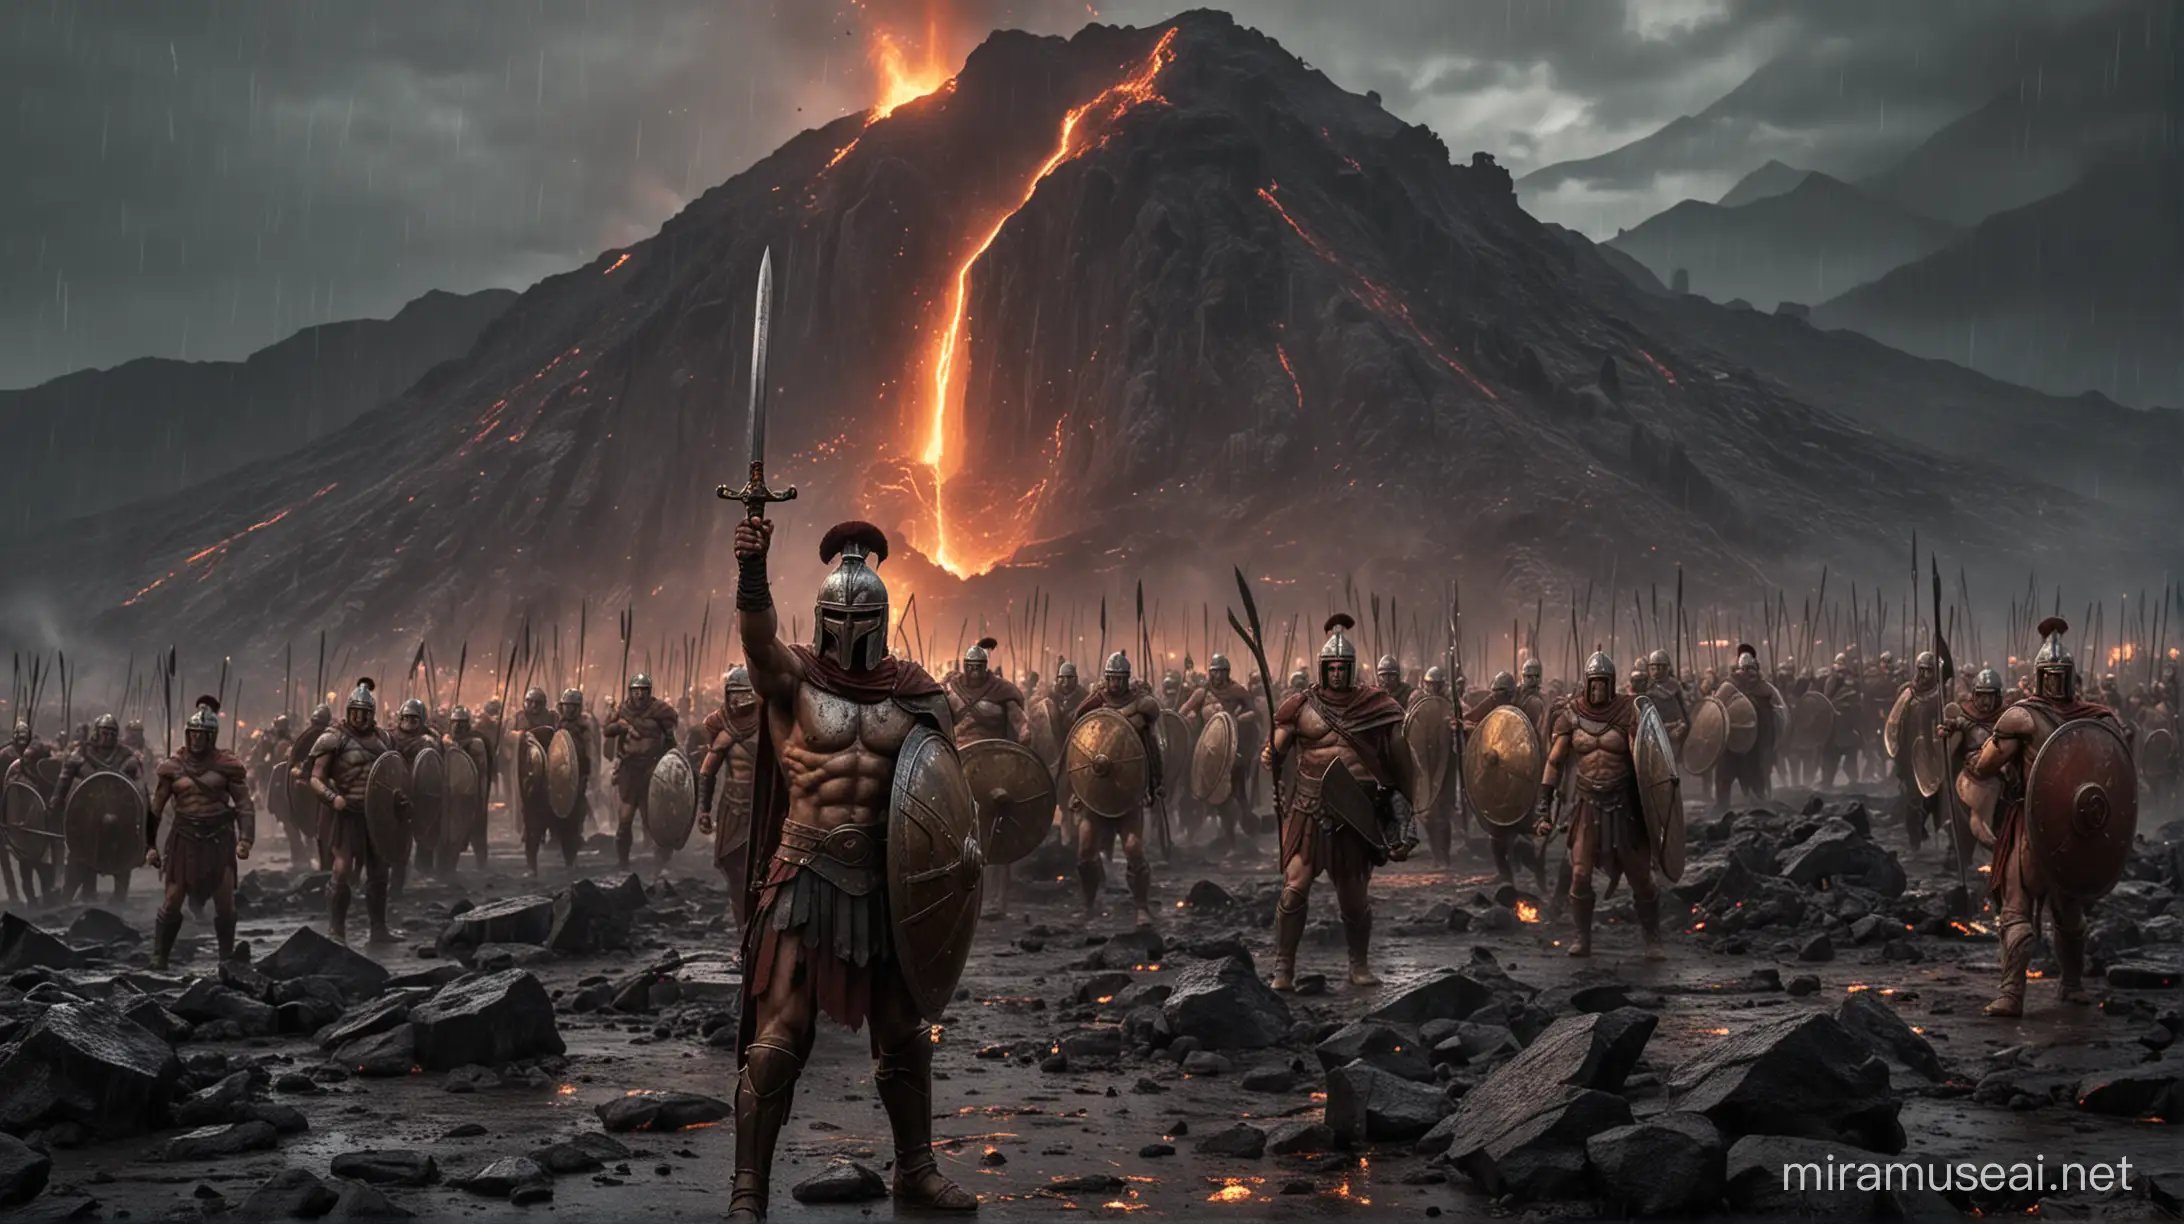 on a rainy night a Few Spartans warriors at the edge of high-level grounds, holding their shields and spartan swords. in the middle you can see only one of them doing his victorious pose with his sword up in the air. Is seen the defeated army on the low-level grounds while the volcano is erupting lava down the mountain in the background.